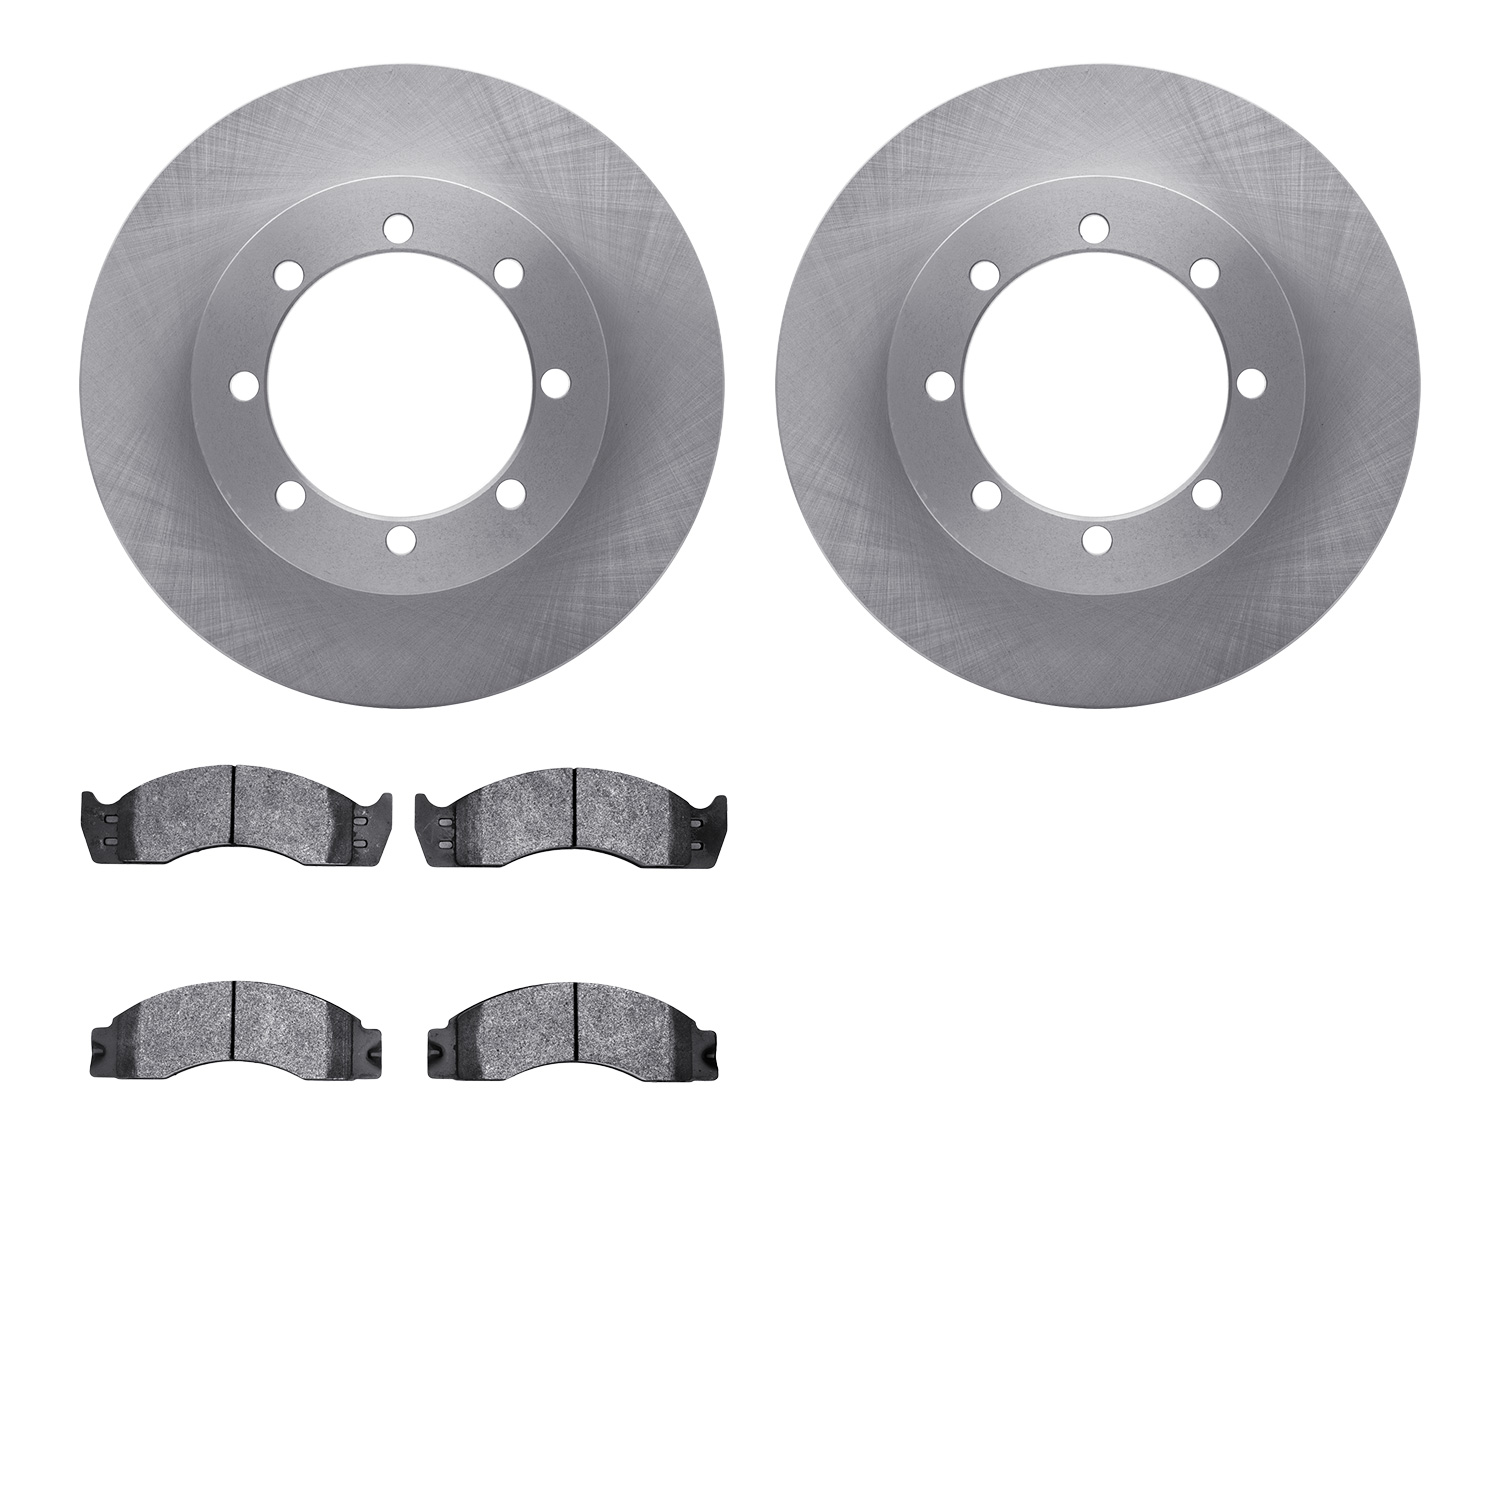 6402-54116 Brake Rotors with Ultimate-Duty Brake Pads, 2003-2007 Ford/Lincoln/Mercury/Mazda, Position: Rear